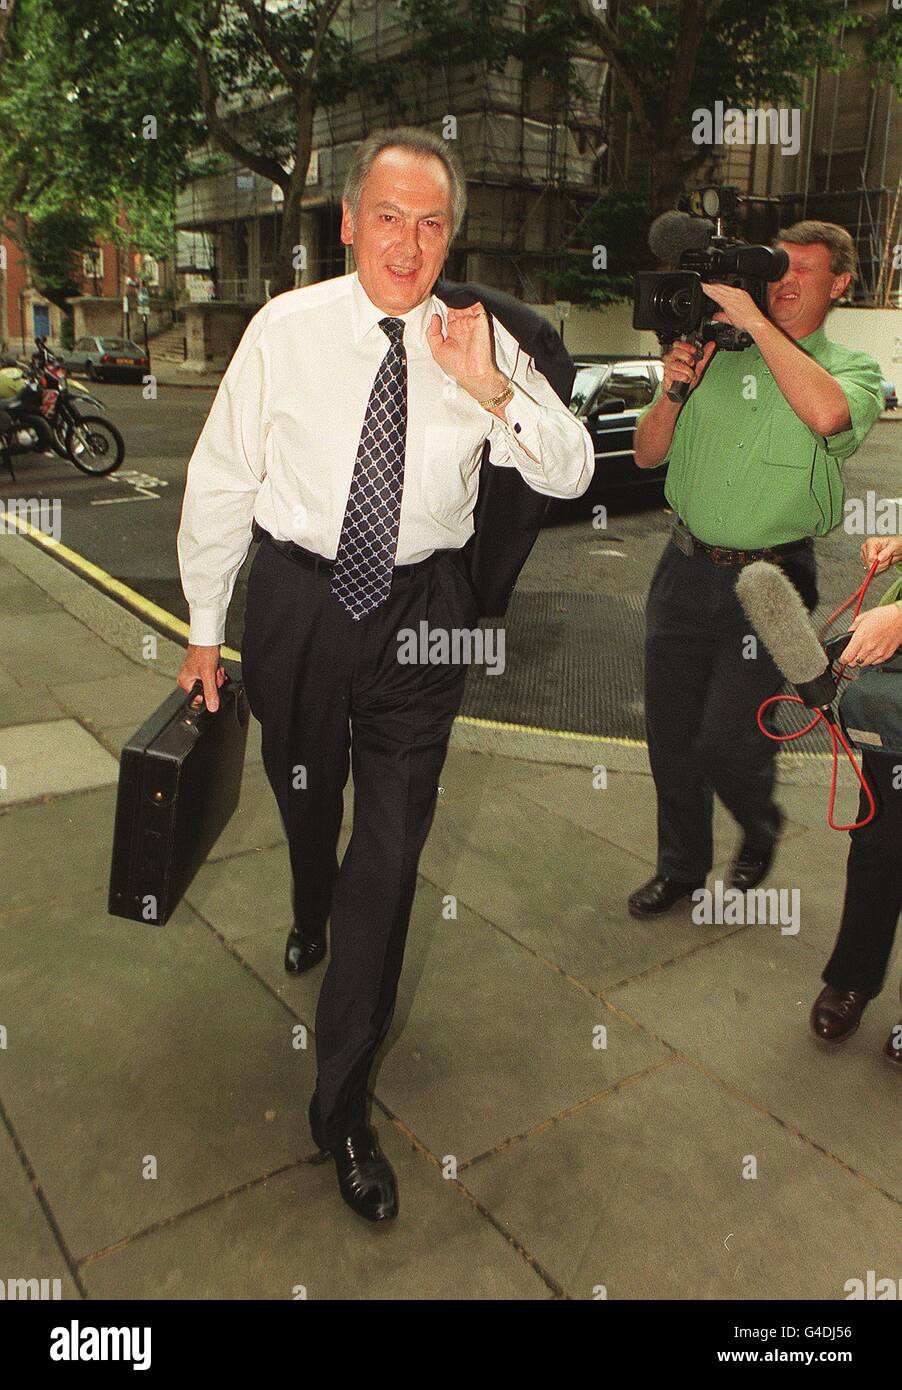 Agriculture Minister Jack Cunningham arrives at his Whitehall office Monday (27 July 1998) in advance of Tony Blair's expected Cabinet reshuffle in which he is tipped to become the Cabinet 'enforcer', charged with co-ordinating polIcy and strategy across government departments. See PA story POLITICS reshuffle. Picture by Andrew Stuart/MK Stock Photo